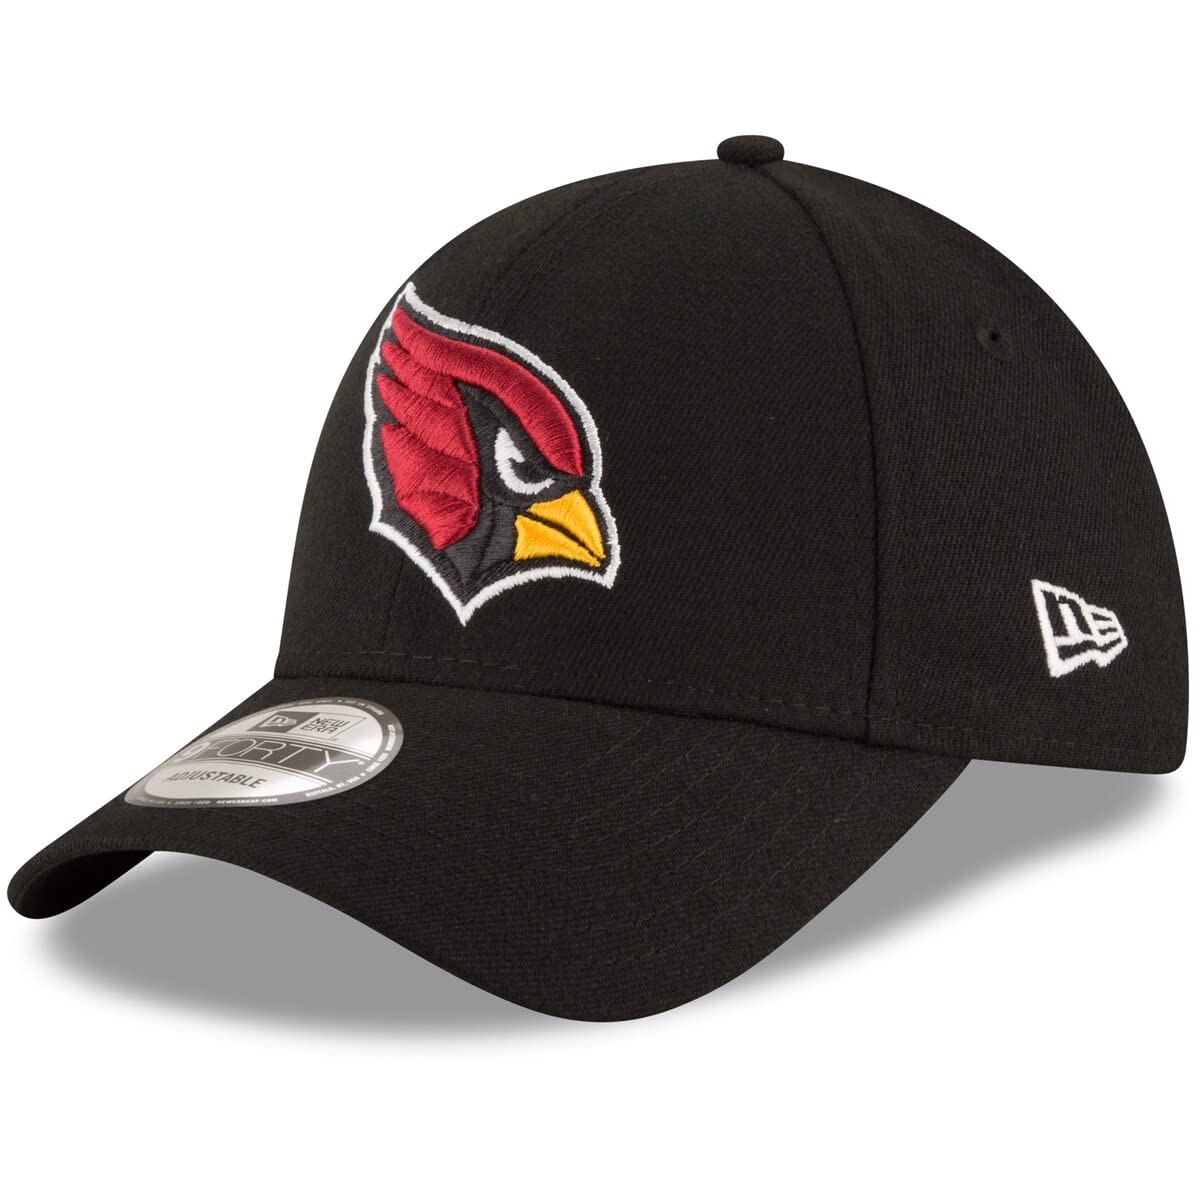 New Era NFL The League 9FORTY Adjustable Cap - Caps Fitted Caps Fitted Arizona Cardinals Black / One Size Caps